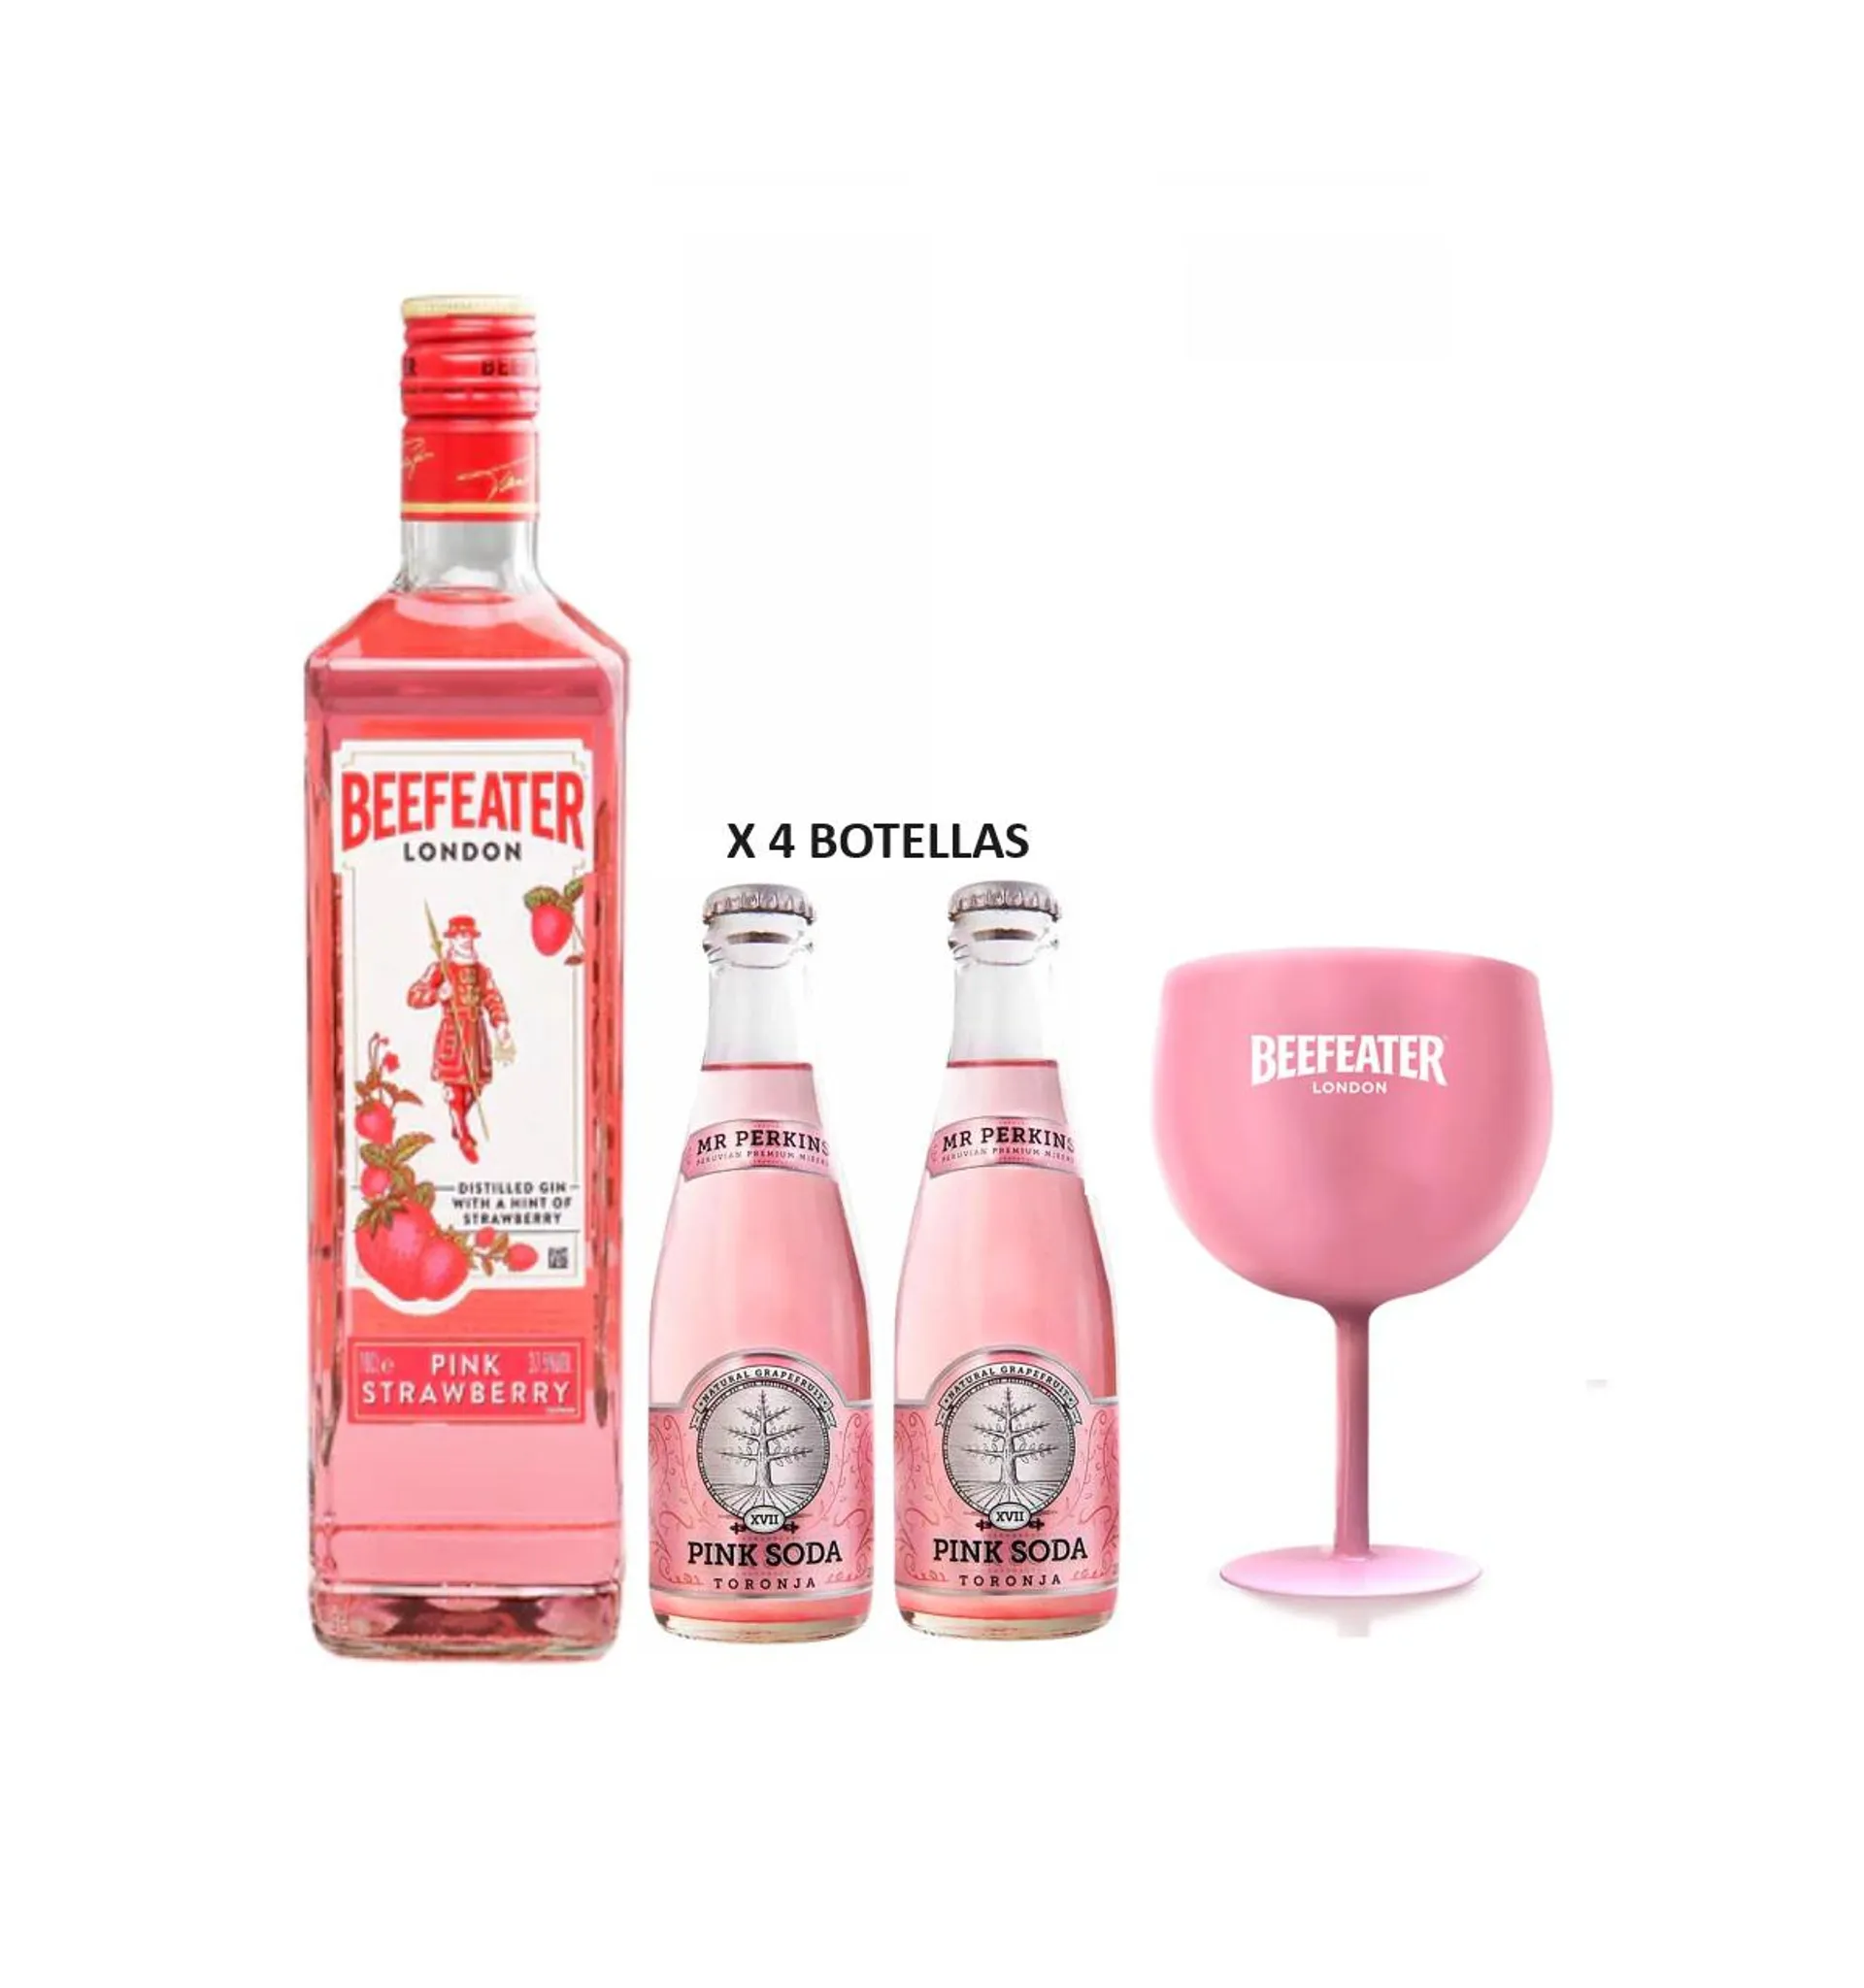 BEEFEATER PINK 700ML + 4 MR. PERKINS PINK 200ML + COPA